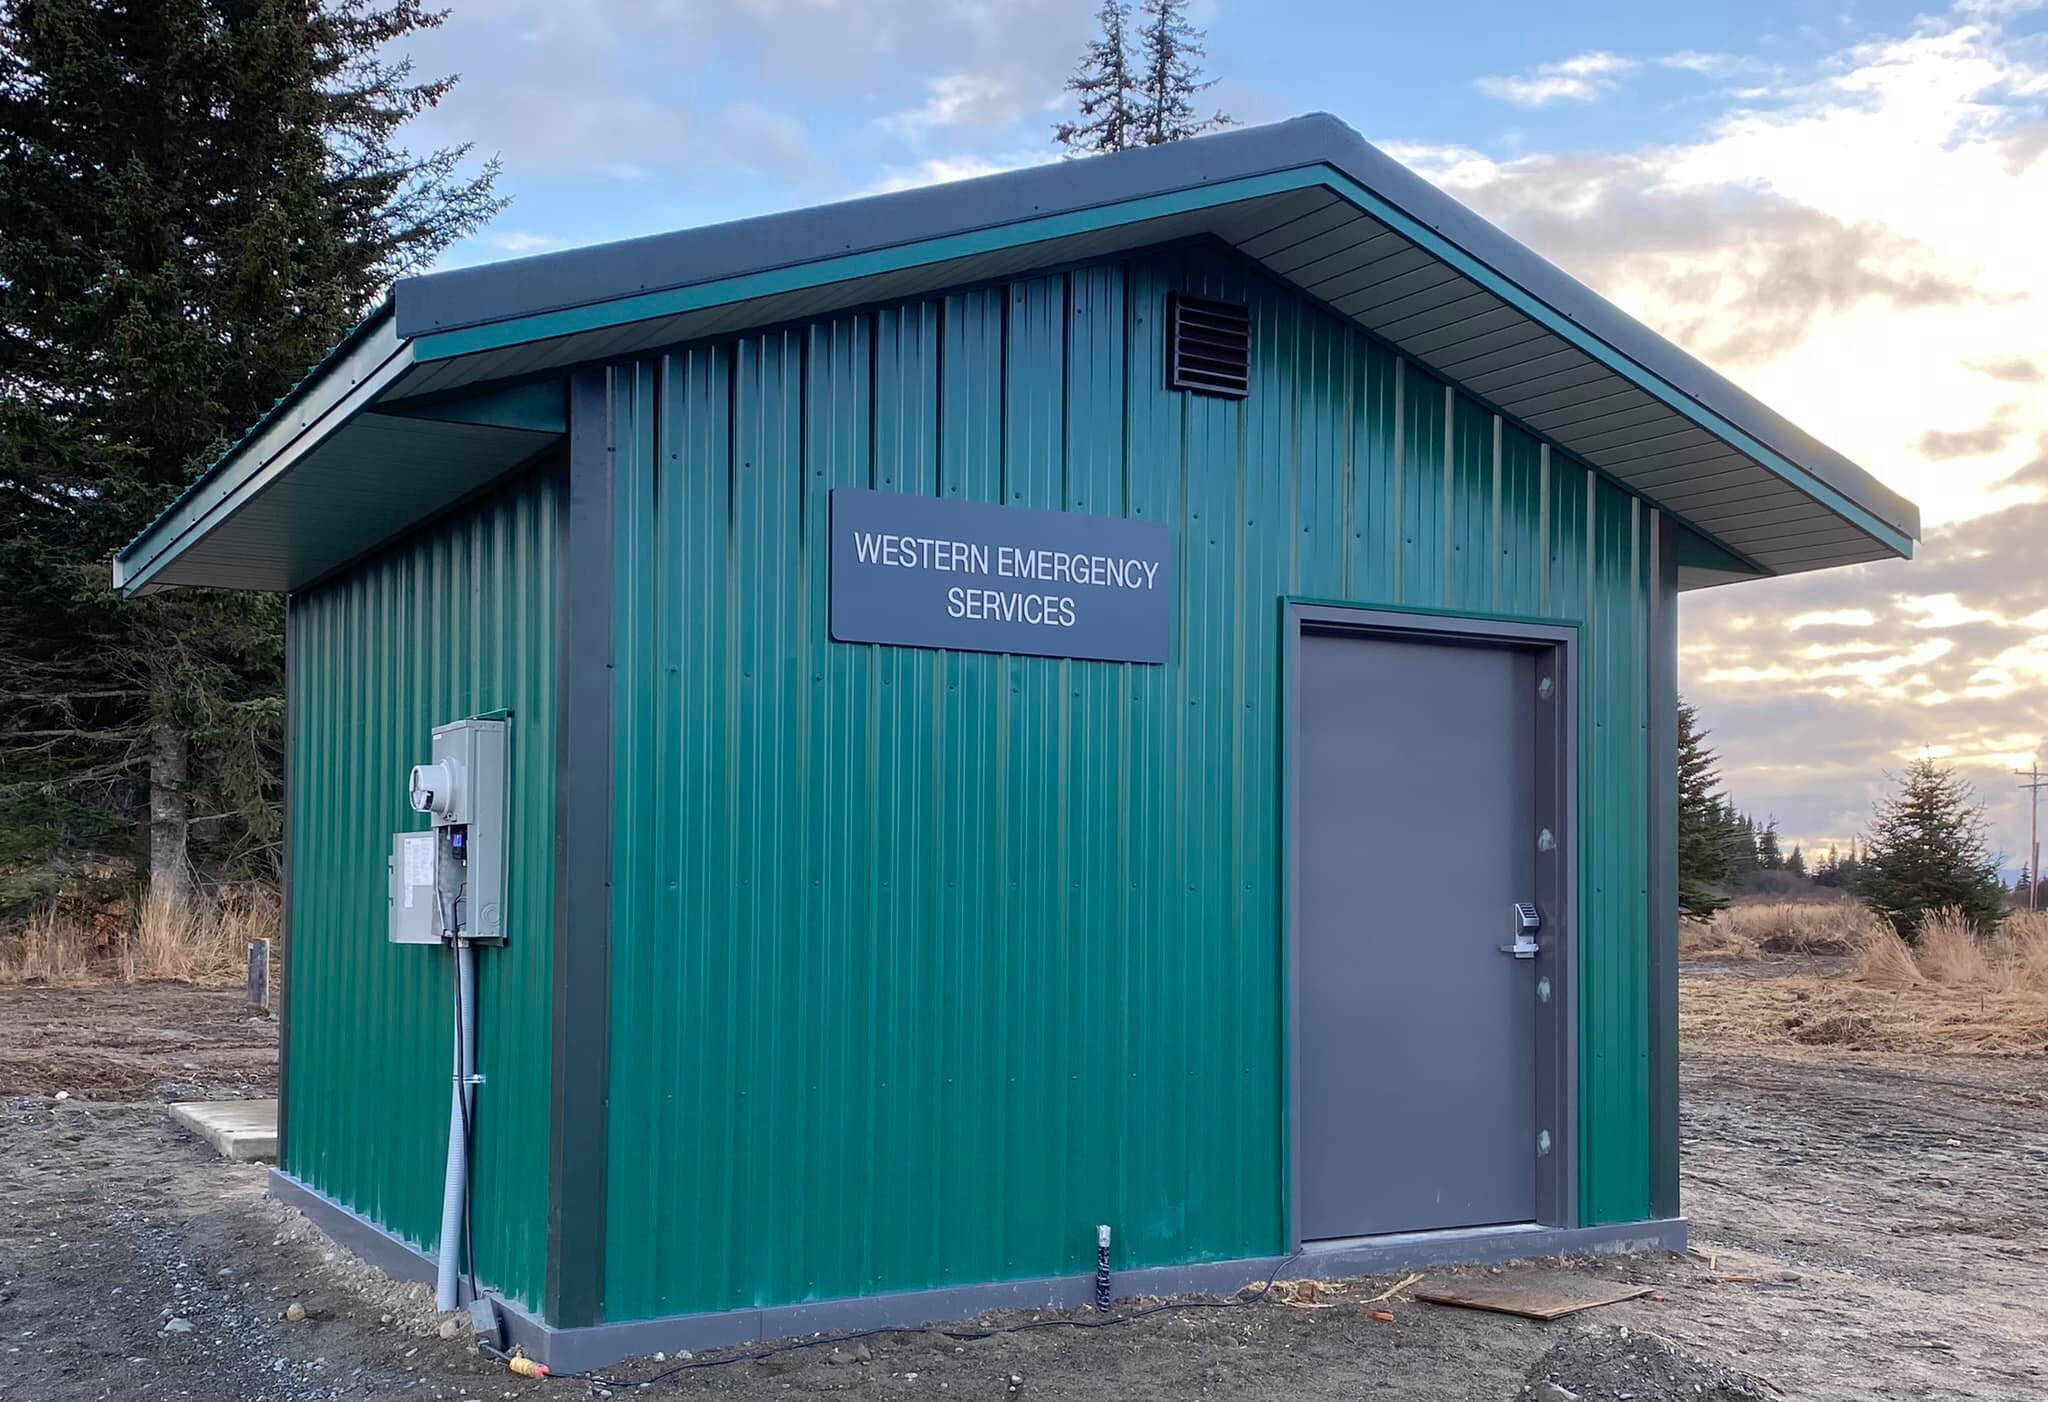 The new Western Emergency Services water fill station in Happy Valley will provide an additional 20,000 gallons of water for fire suppression. The station is located at Resch Avenue and Sterling Highway. (Photo from Western Emergency Services Facebook)